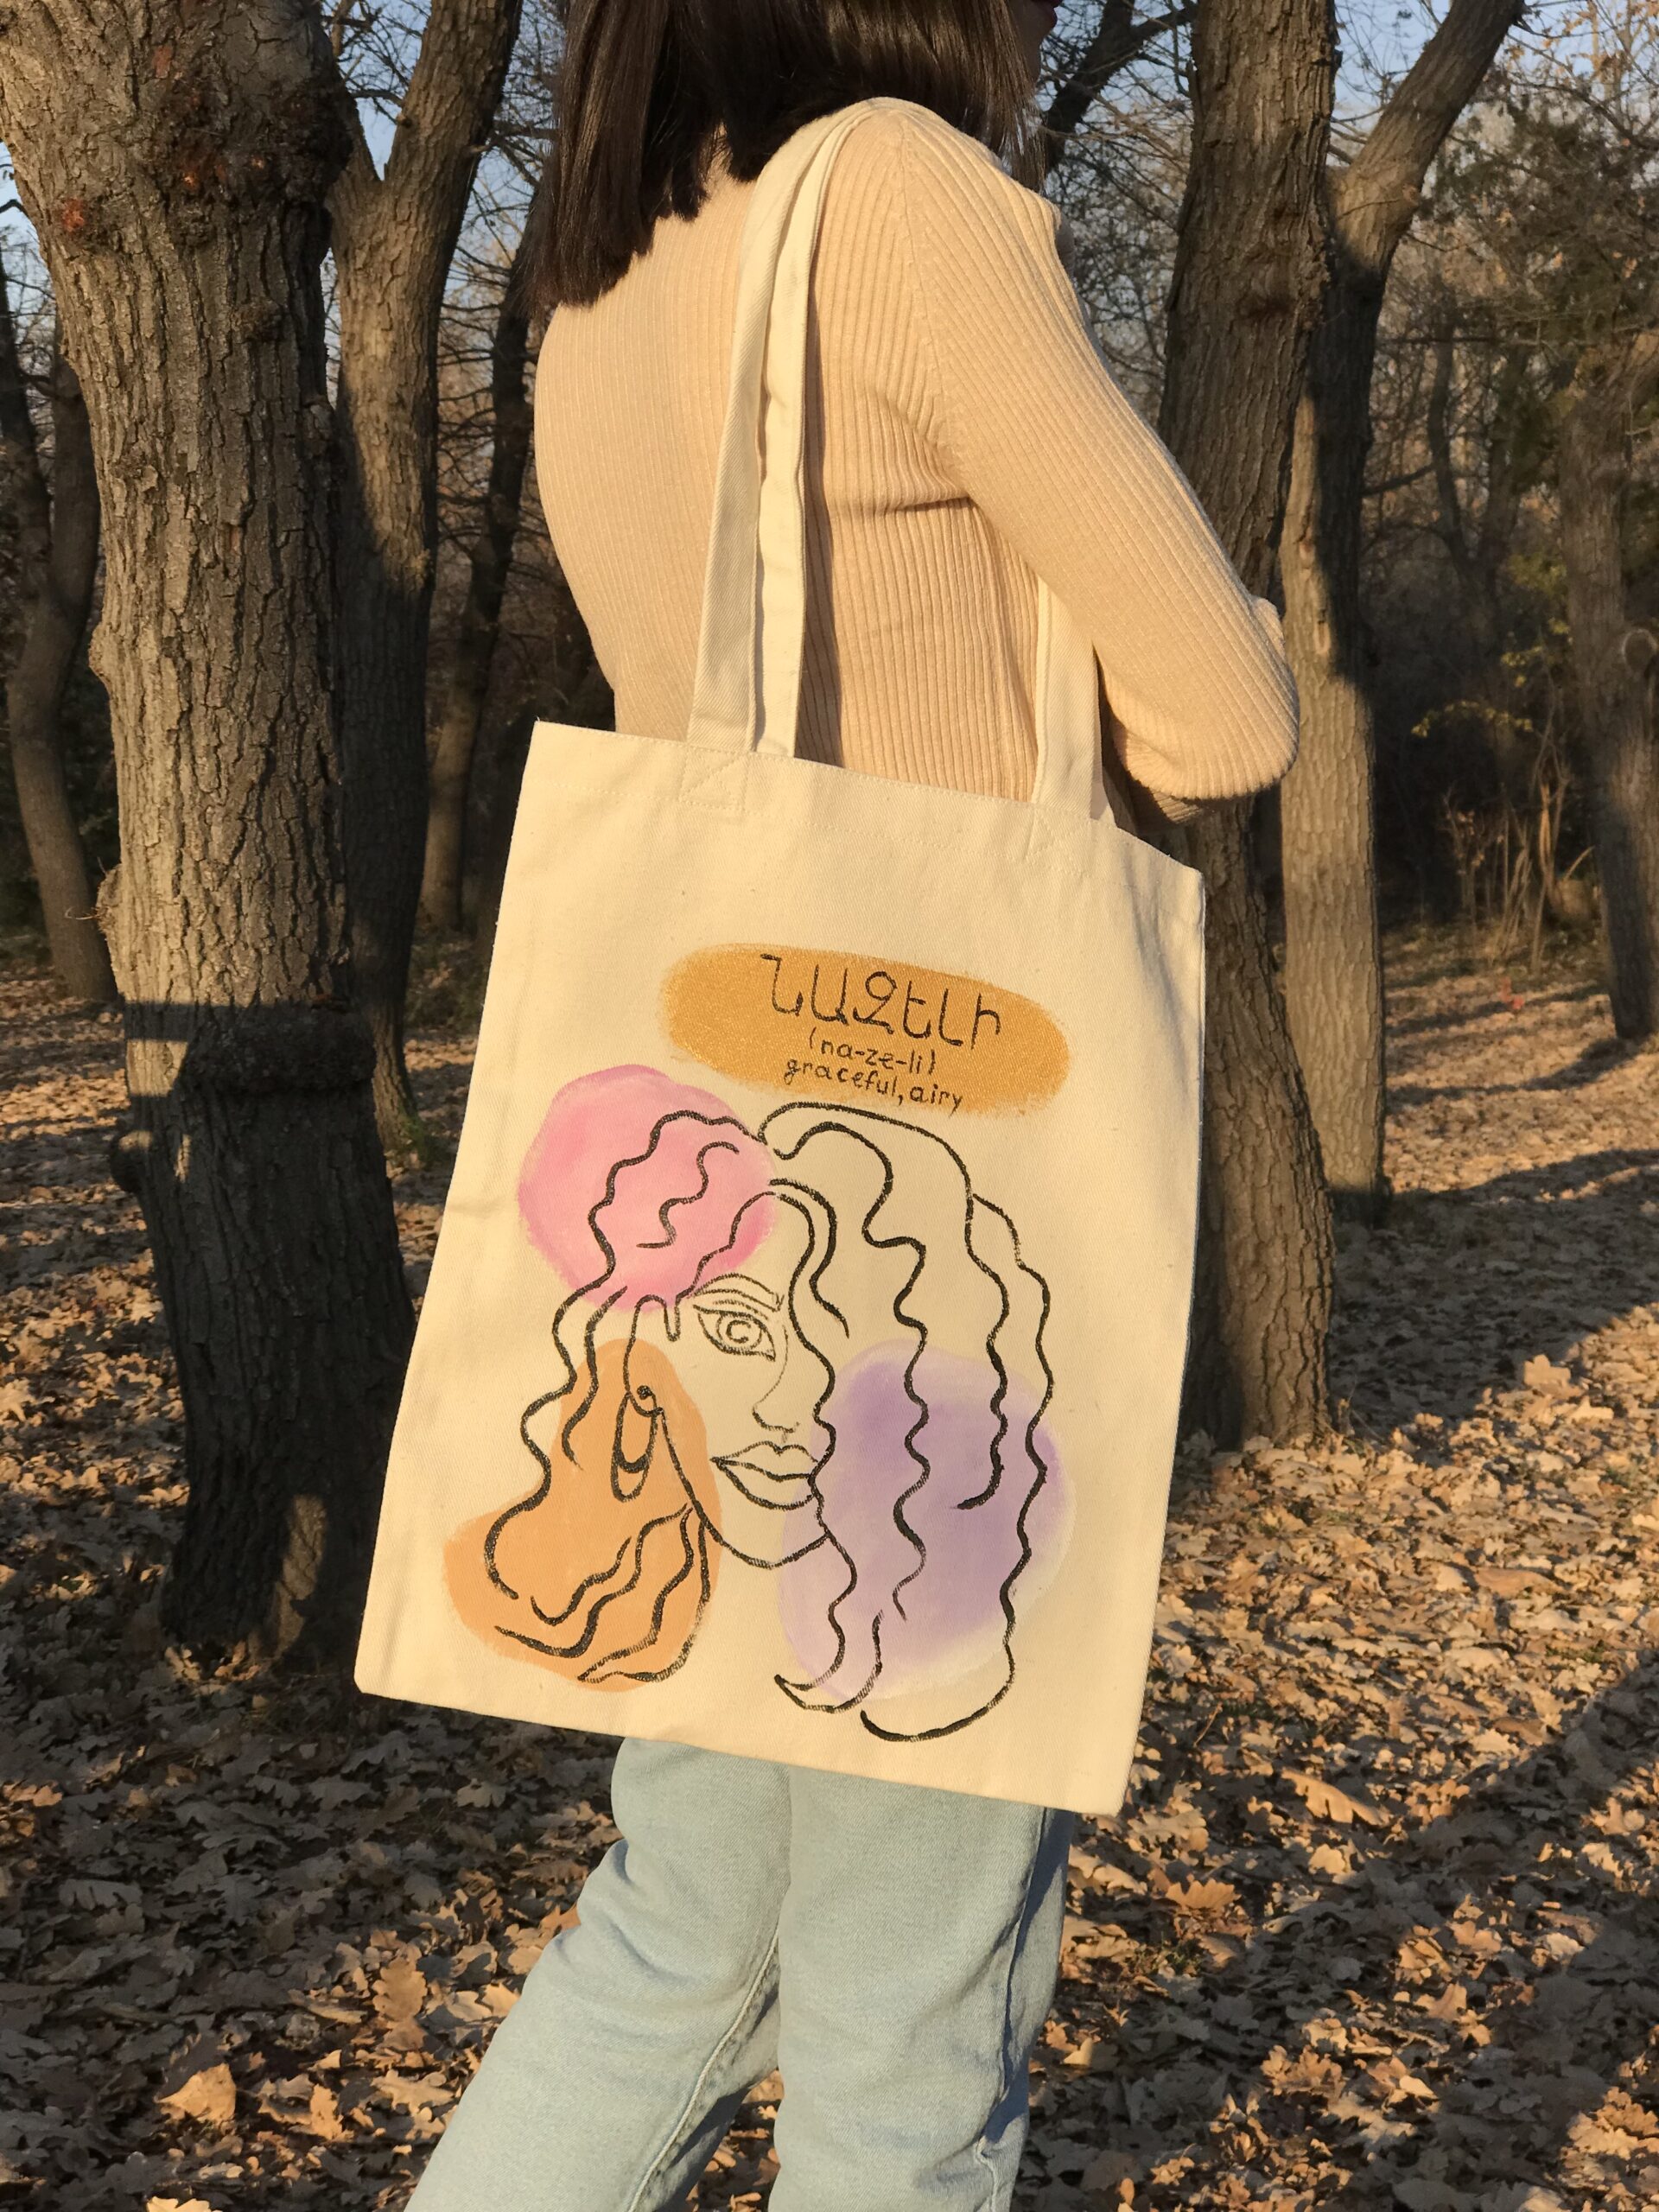 hand painted bags